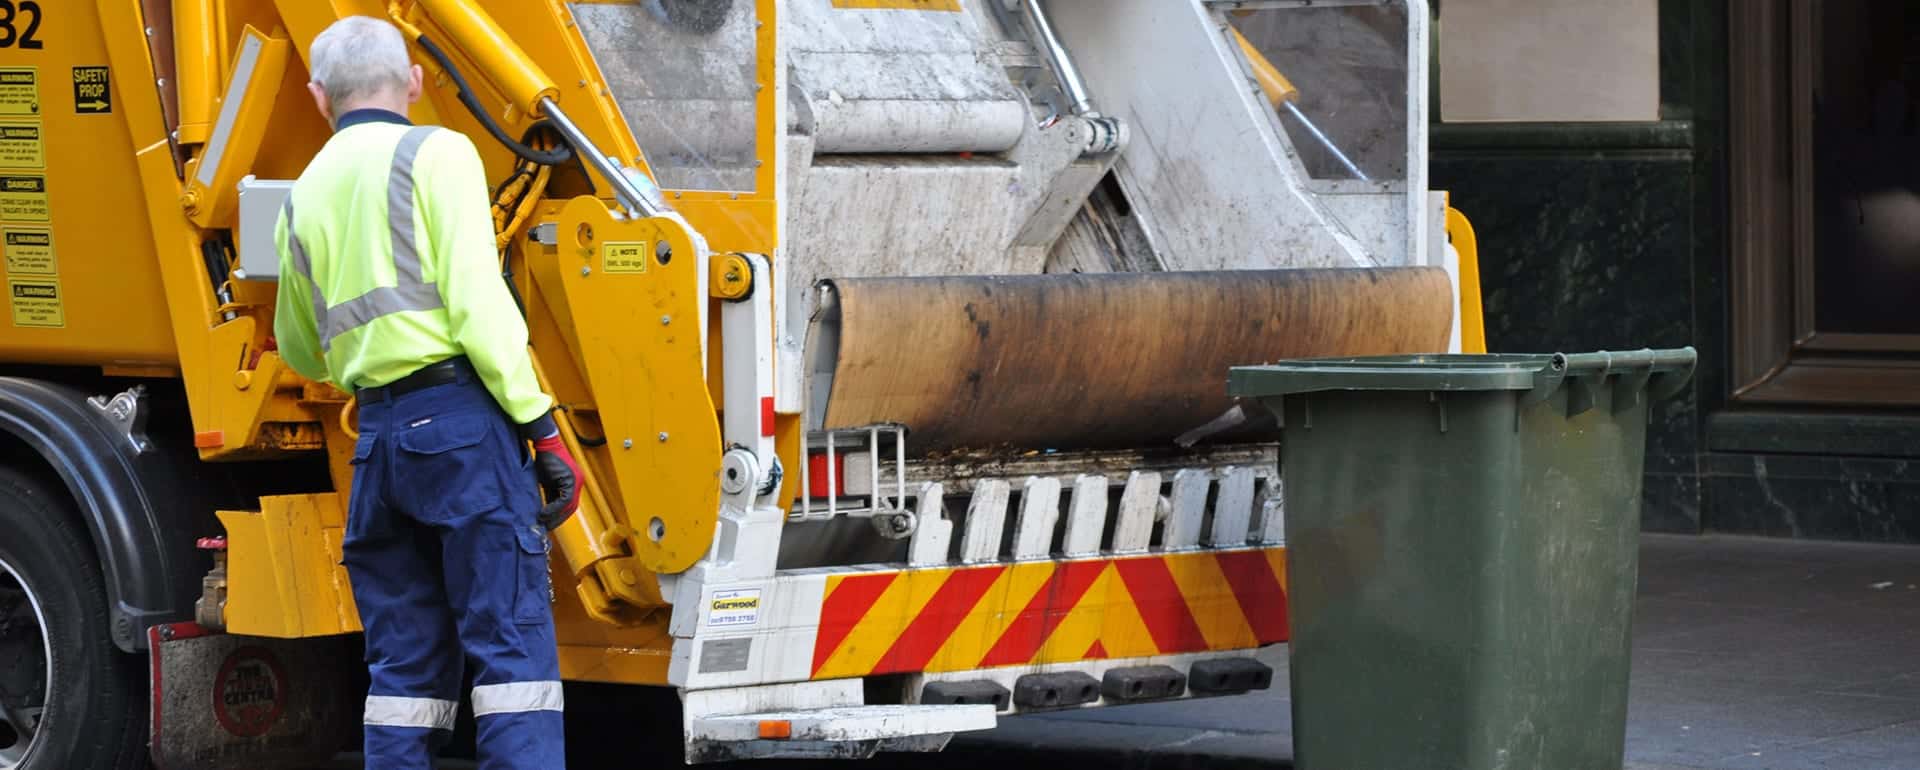 Waste Management Solutions from Industrial Communications and Electronics